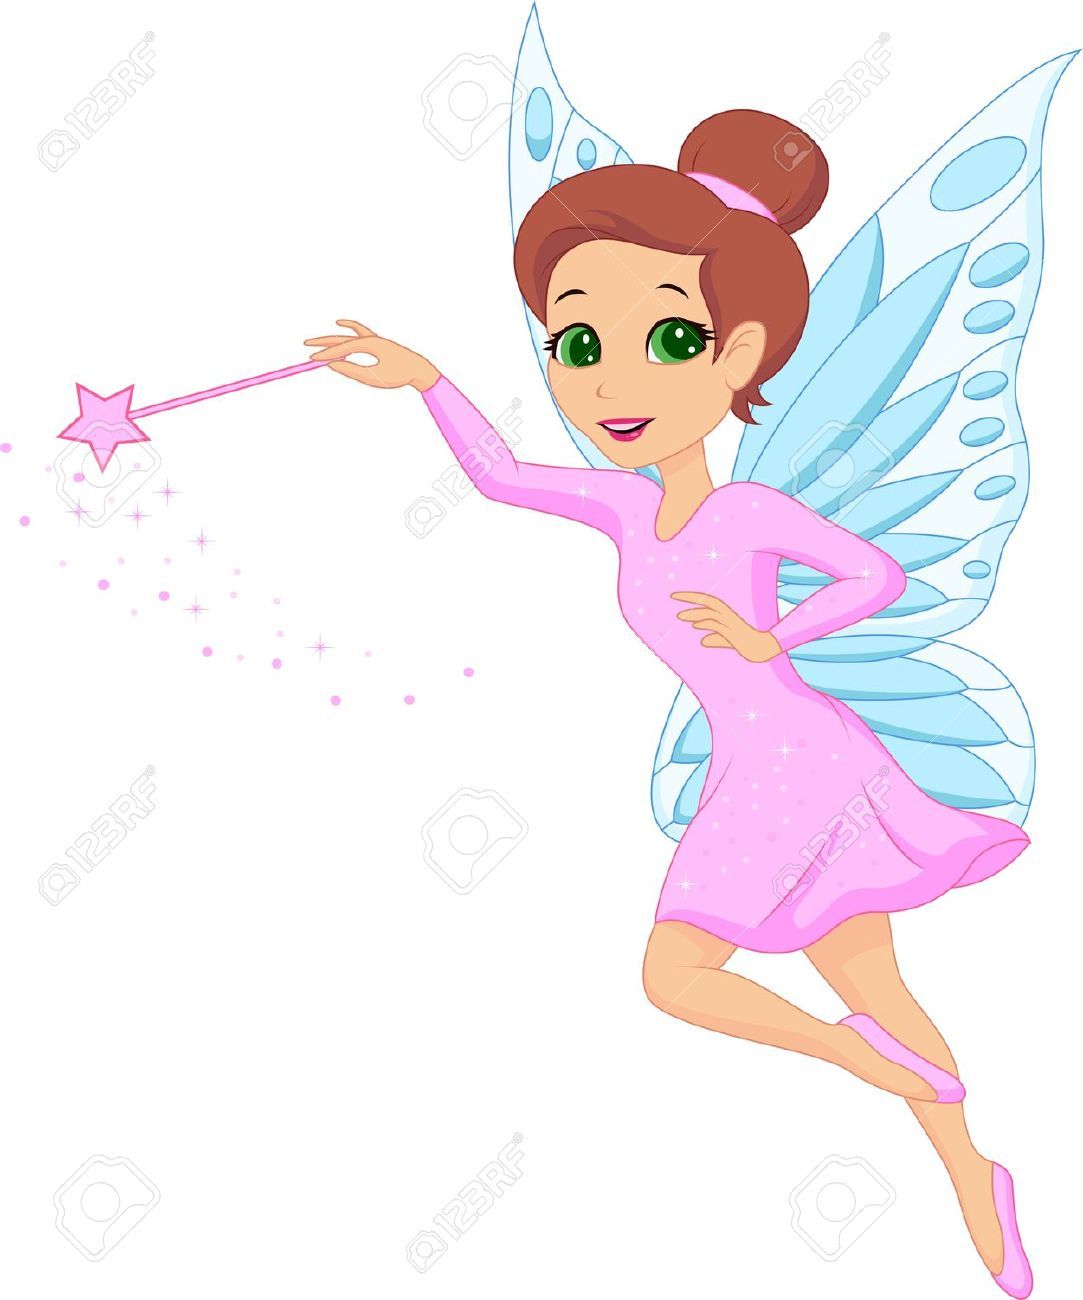 Cartoon Fairy Images, Stock Pictures, Royalty Free Cartoon